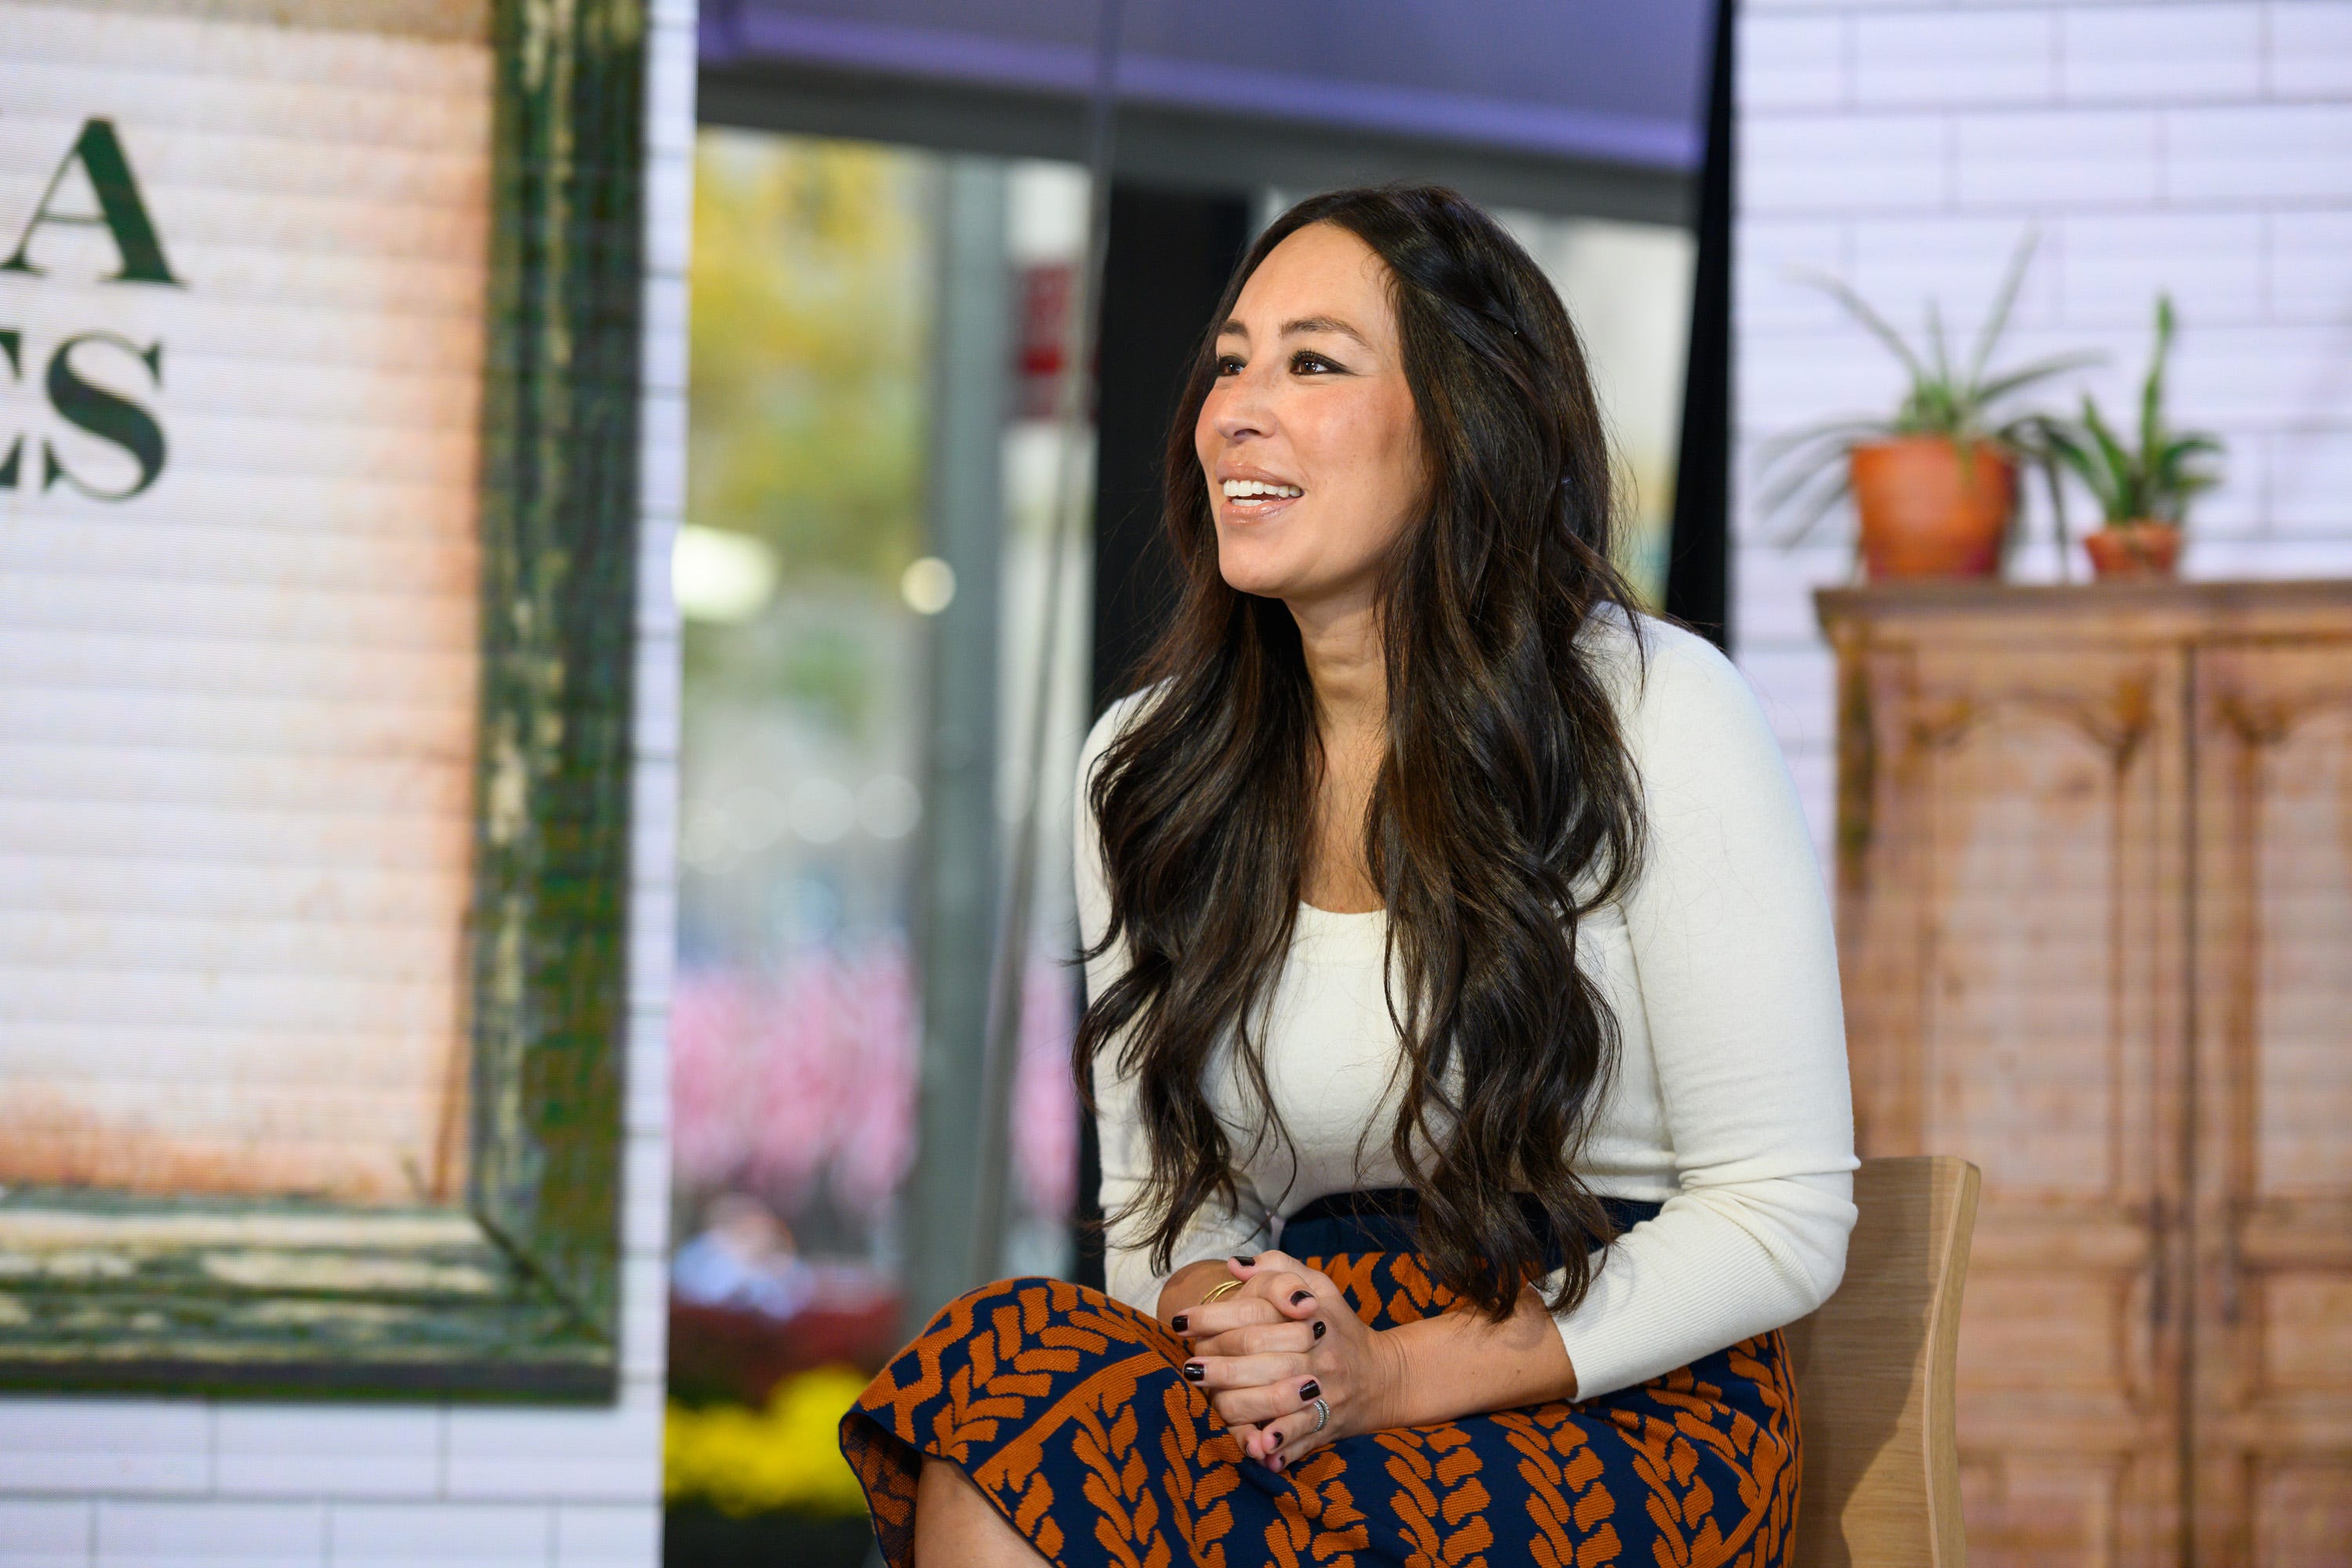 Joanna Gaines Just Dropped Her Latest Line and It's Giving Us Major Spring Fever